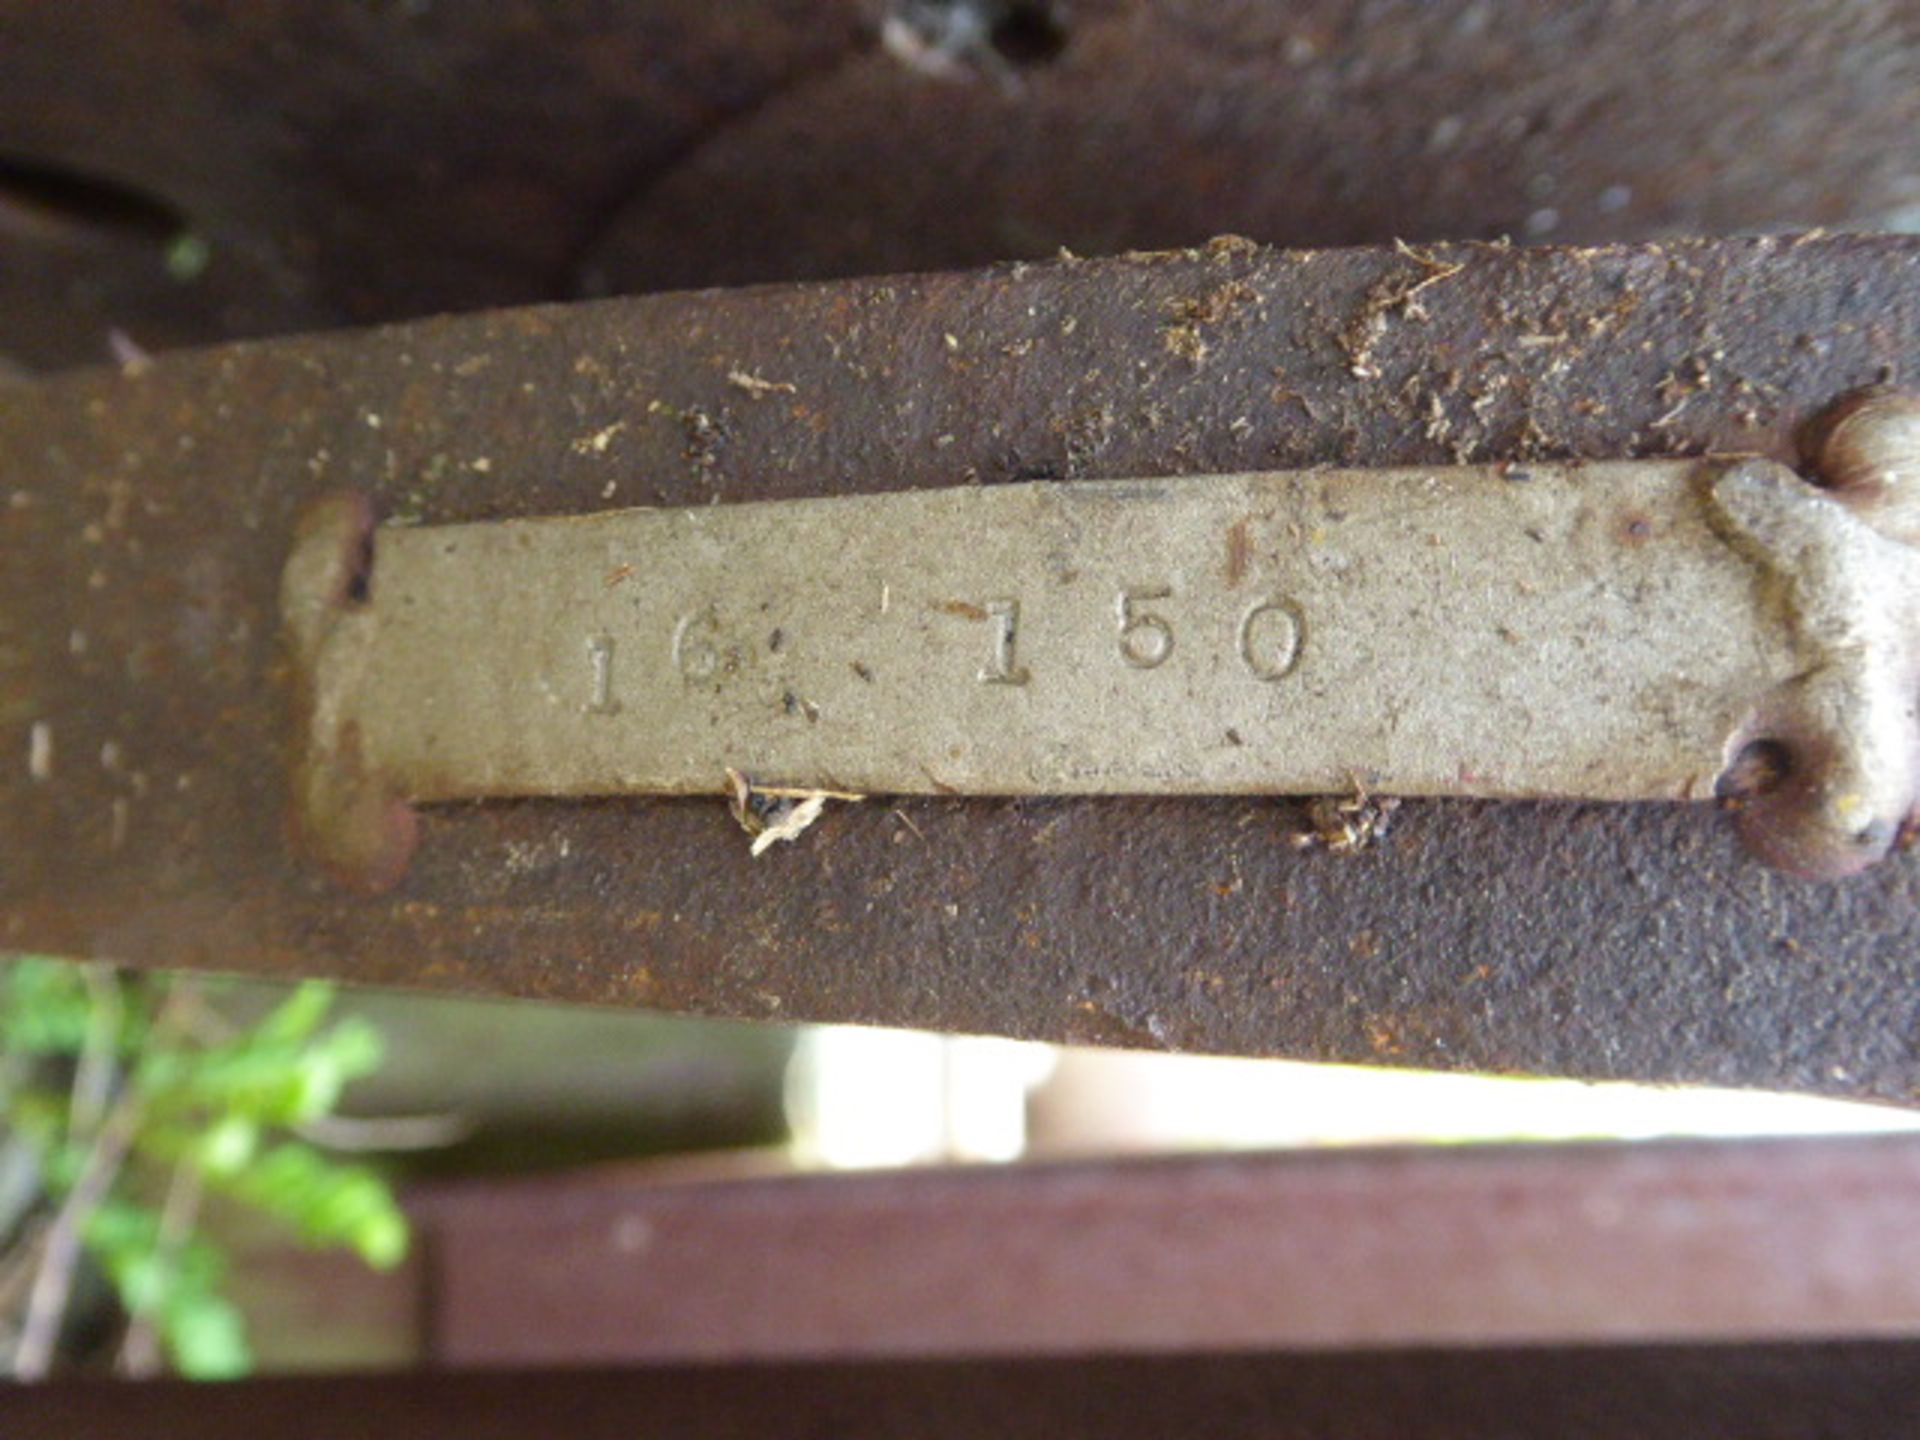 Steel Blind Flange, 16", 150 Lbs. Rated (as marked) - Image 2 of 2